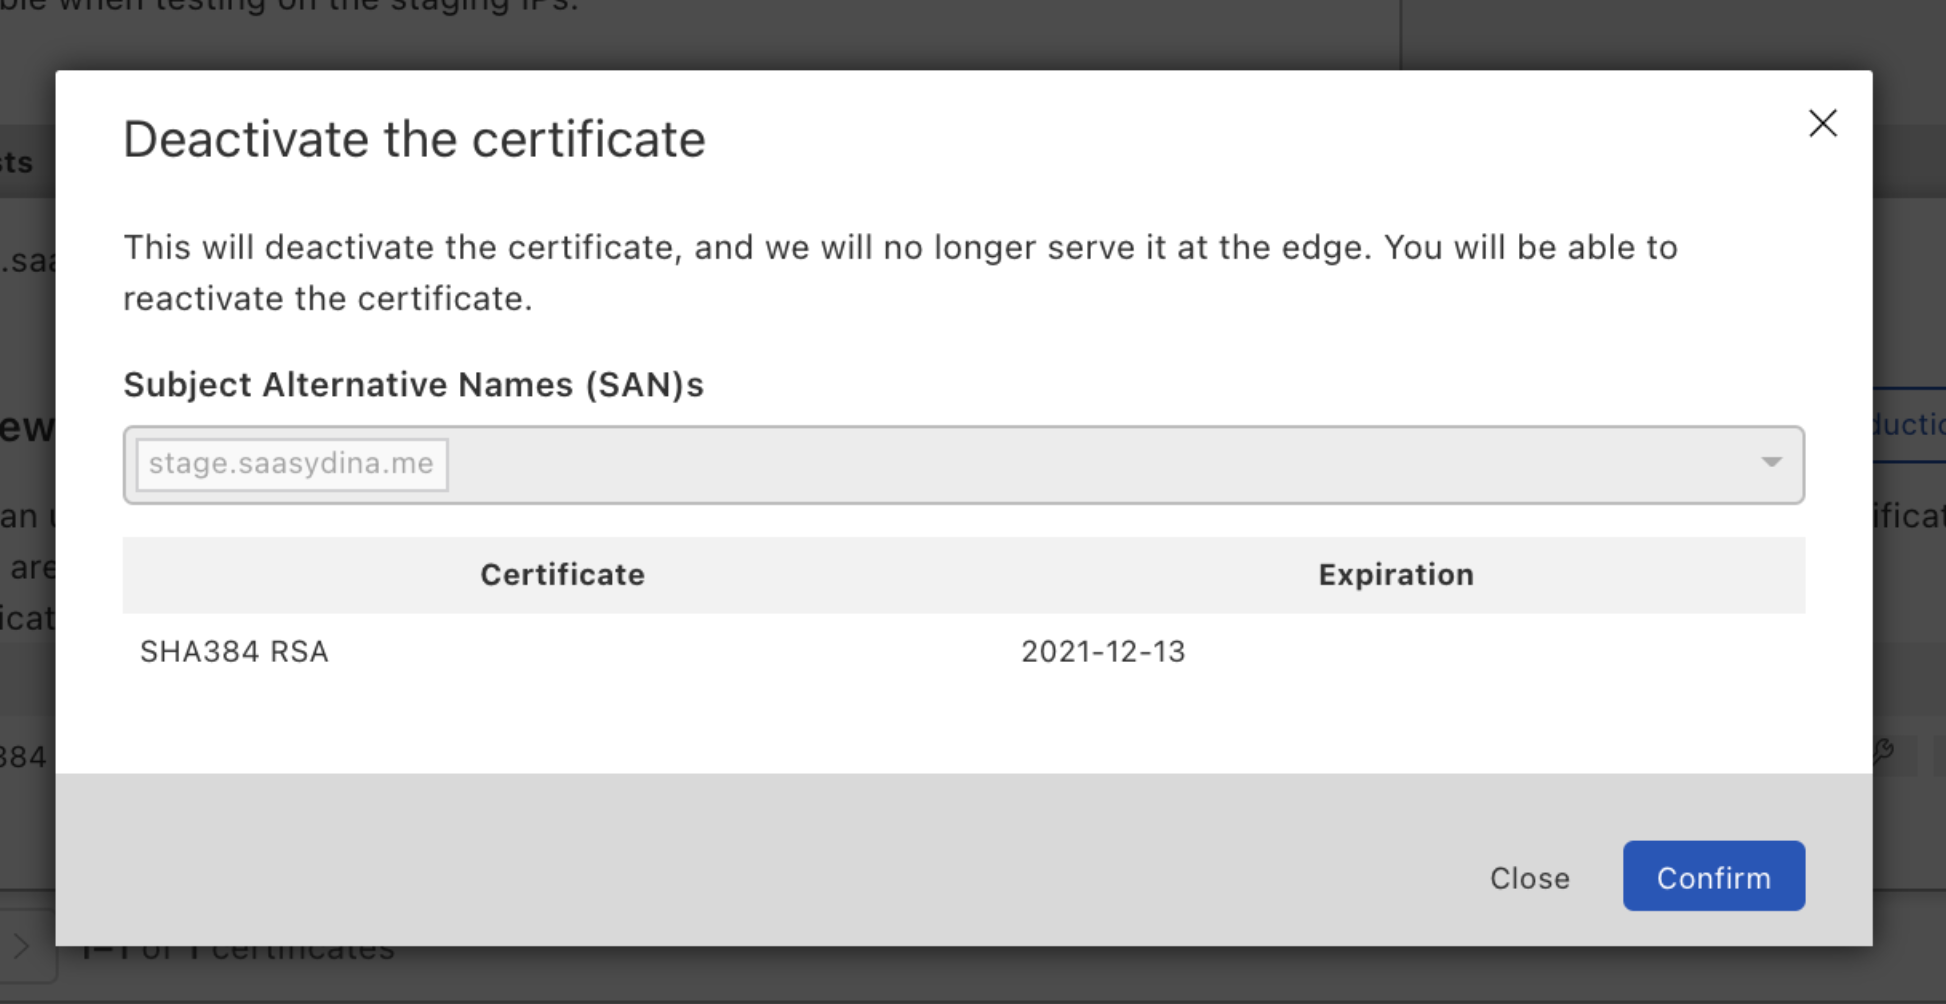 Deactivating a certificate from the production environment after a bad rollout